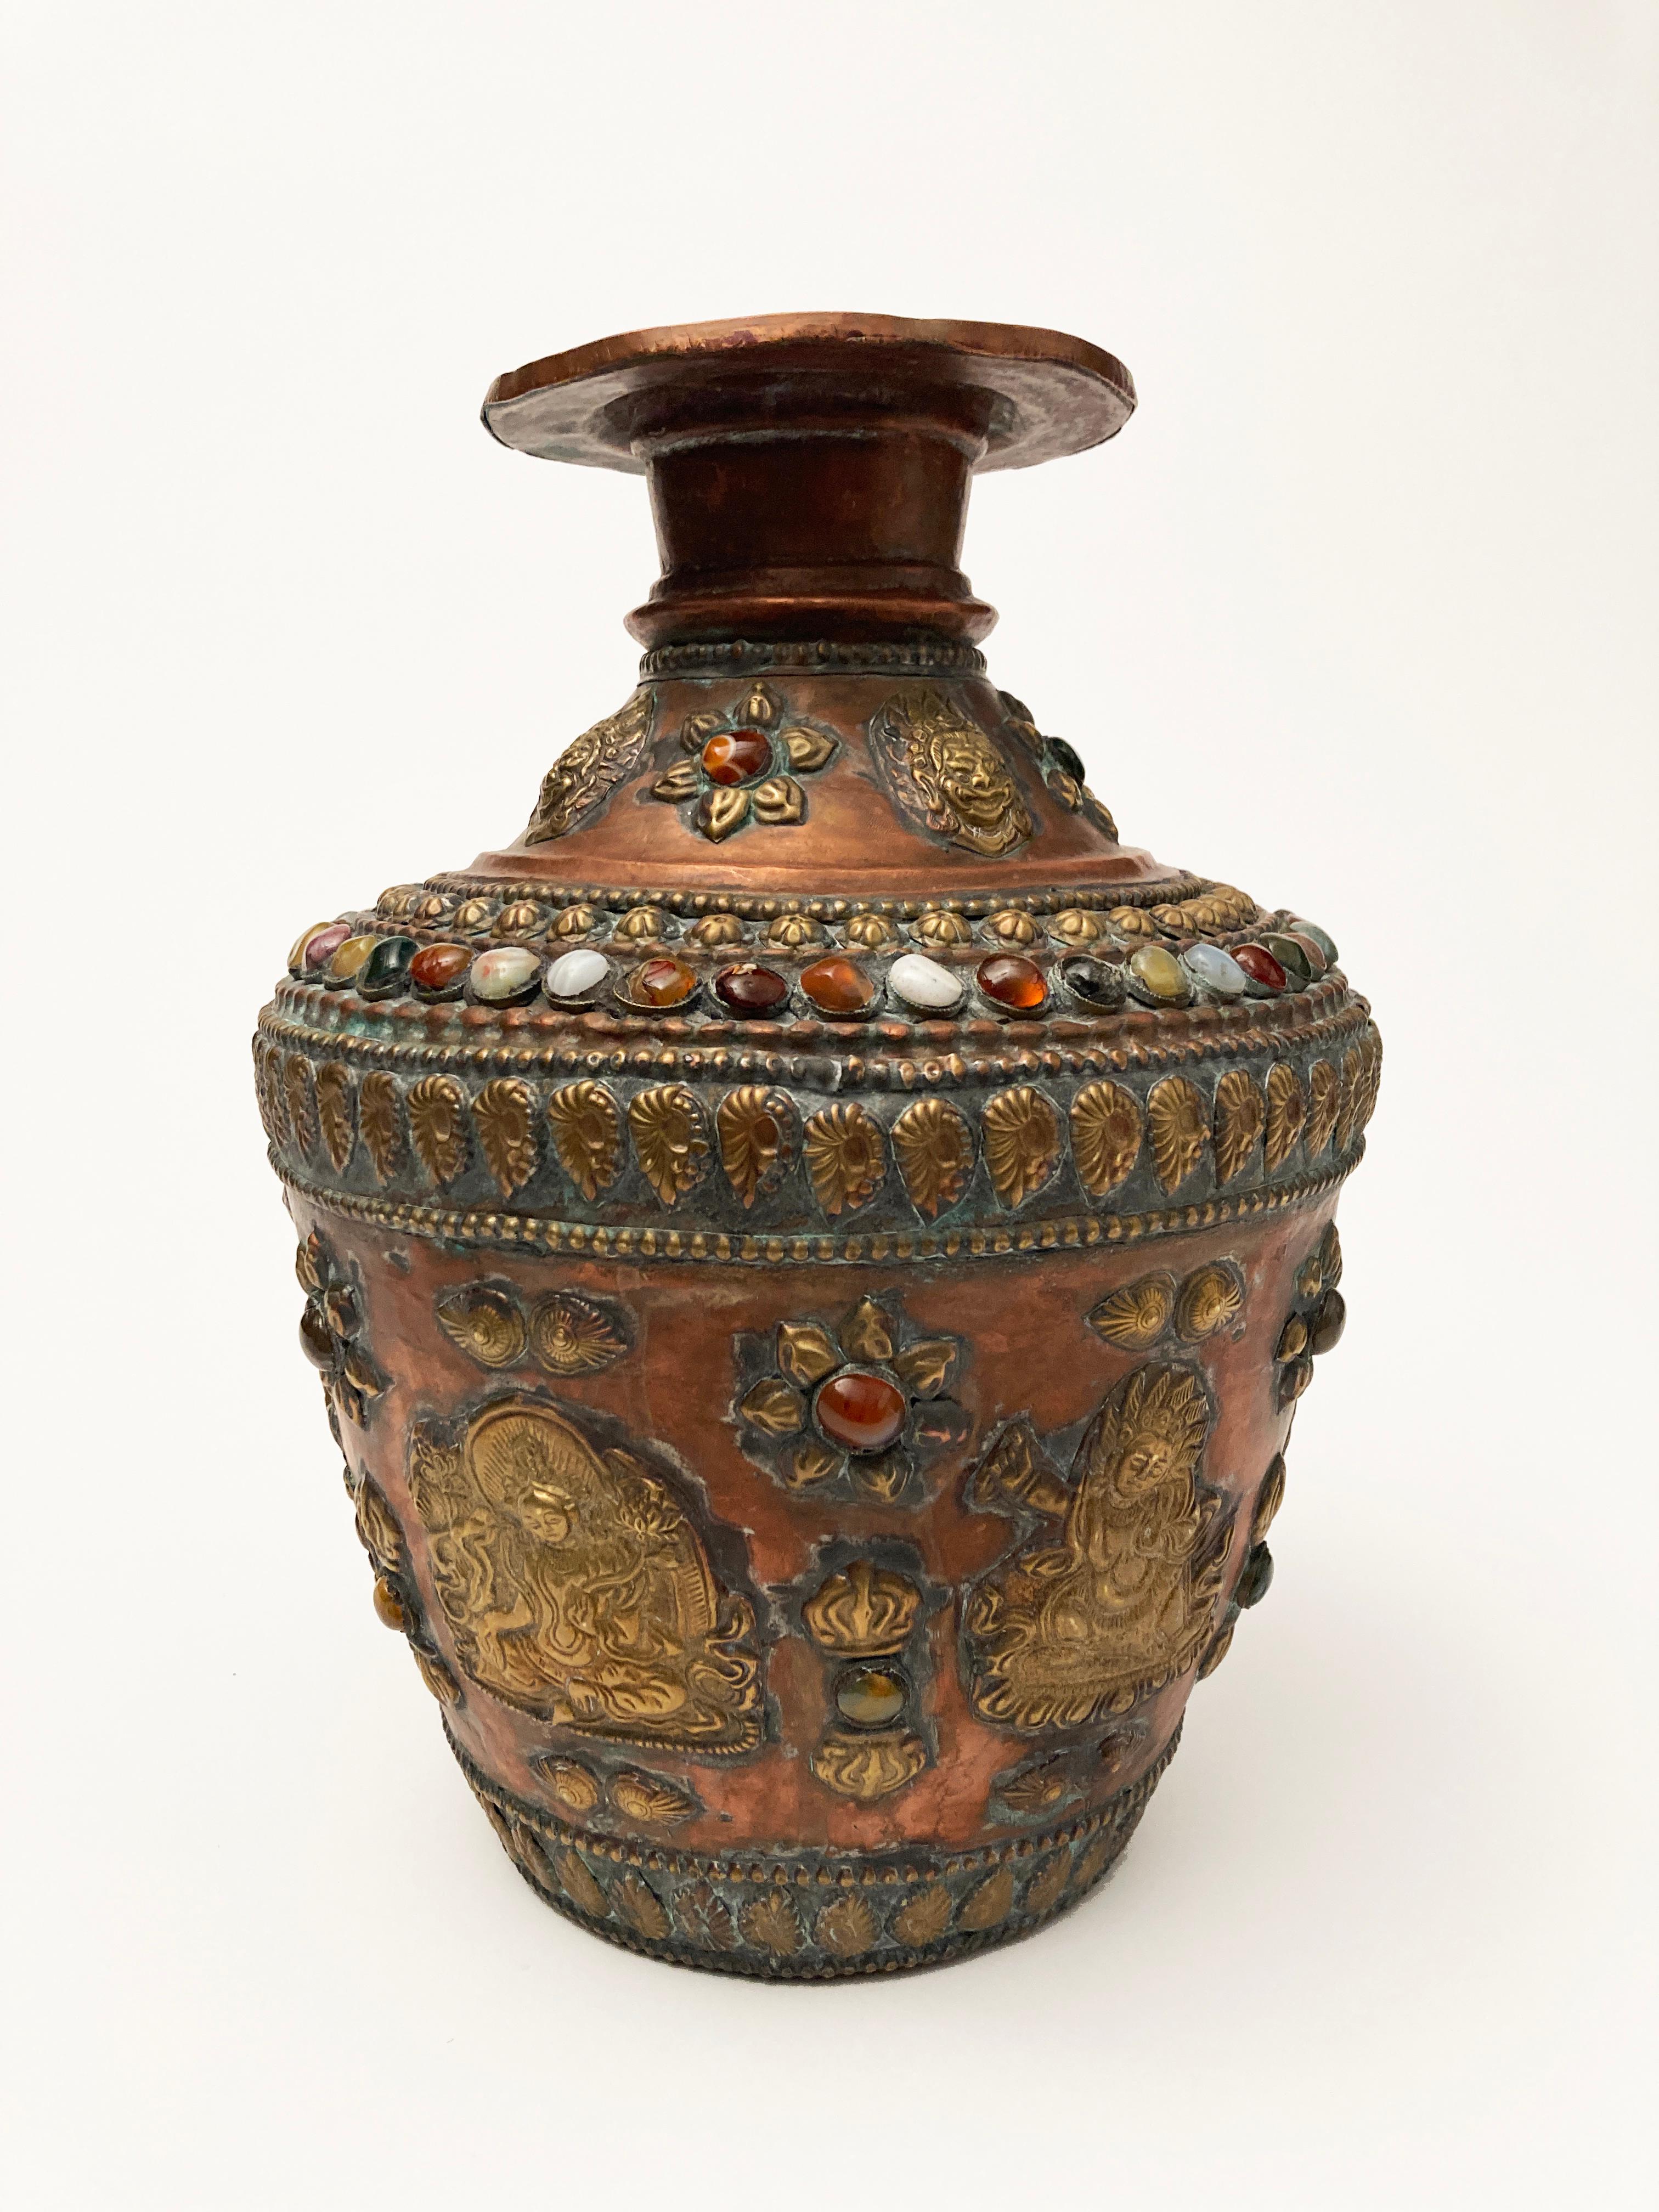 Copper vessels such as this have been made for literally centuries by Tibetan monks and other cultural sectors. The craftsmanship is wonderfully primitive with hammered copper, brass and bronze overall, yet portrays the intricacies of such